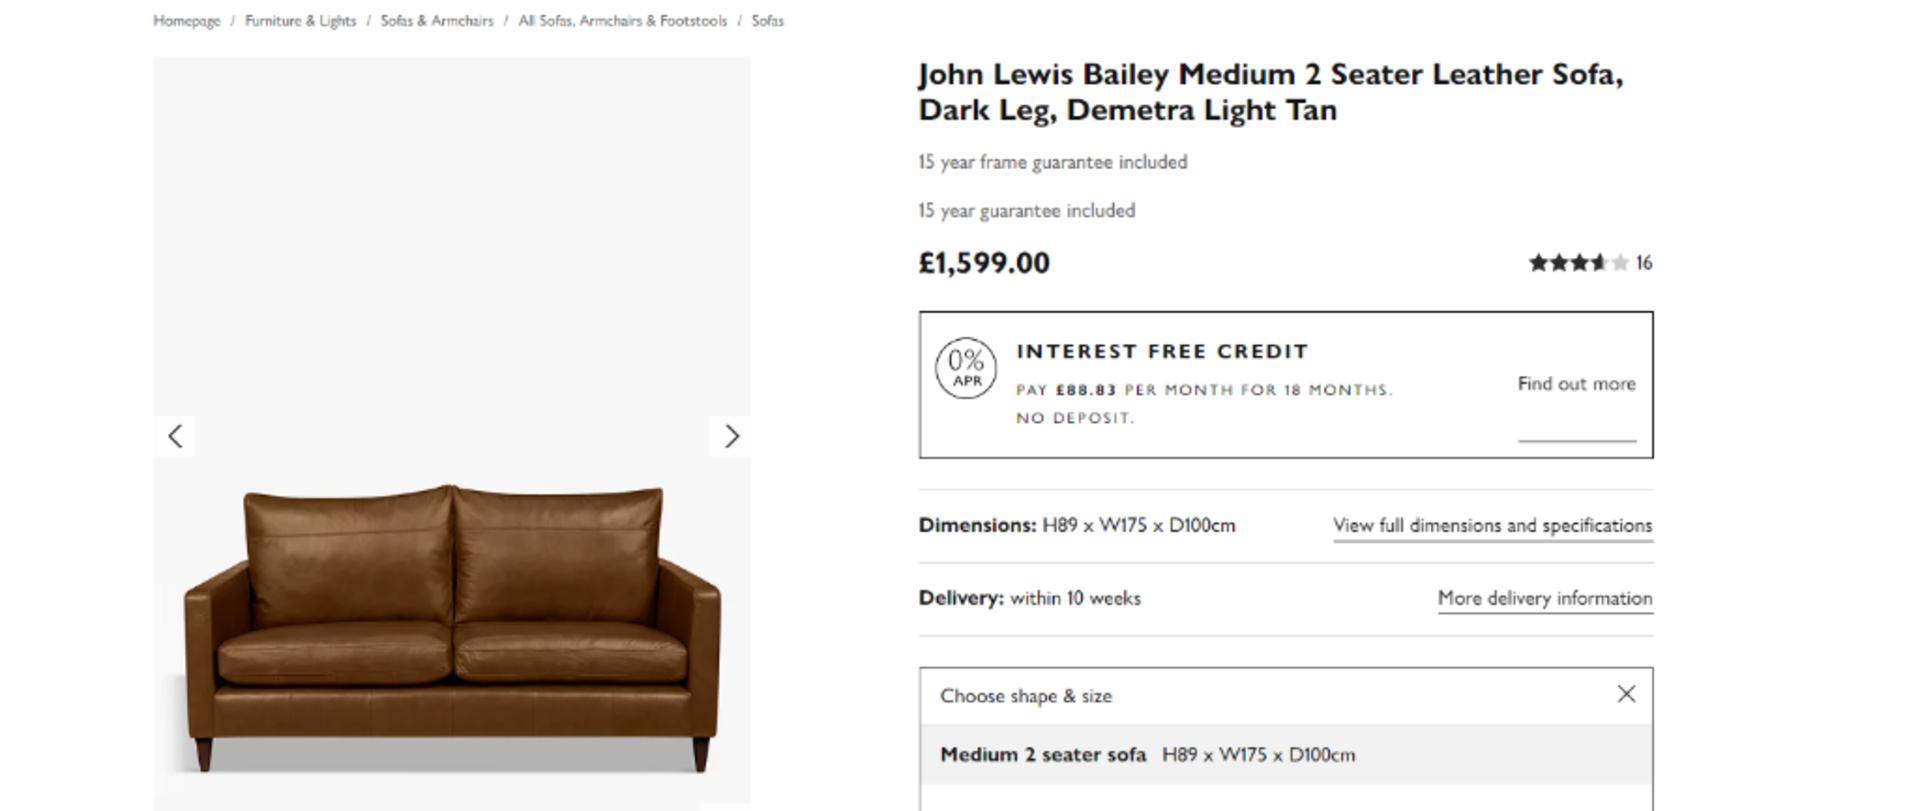 BRAND NEW John Lewis Bailey full leather 2 seater sofa in Tan. RRP: £1,599.00 - Image 4 of 4